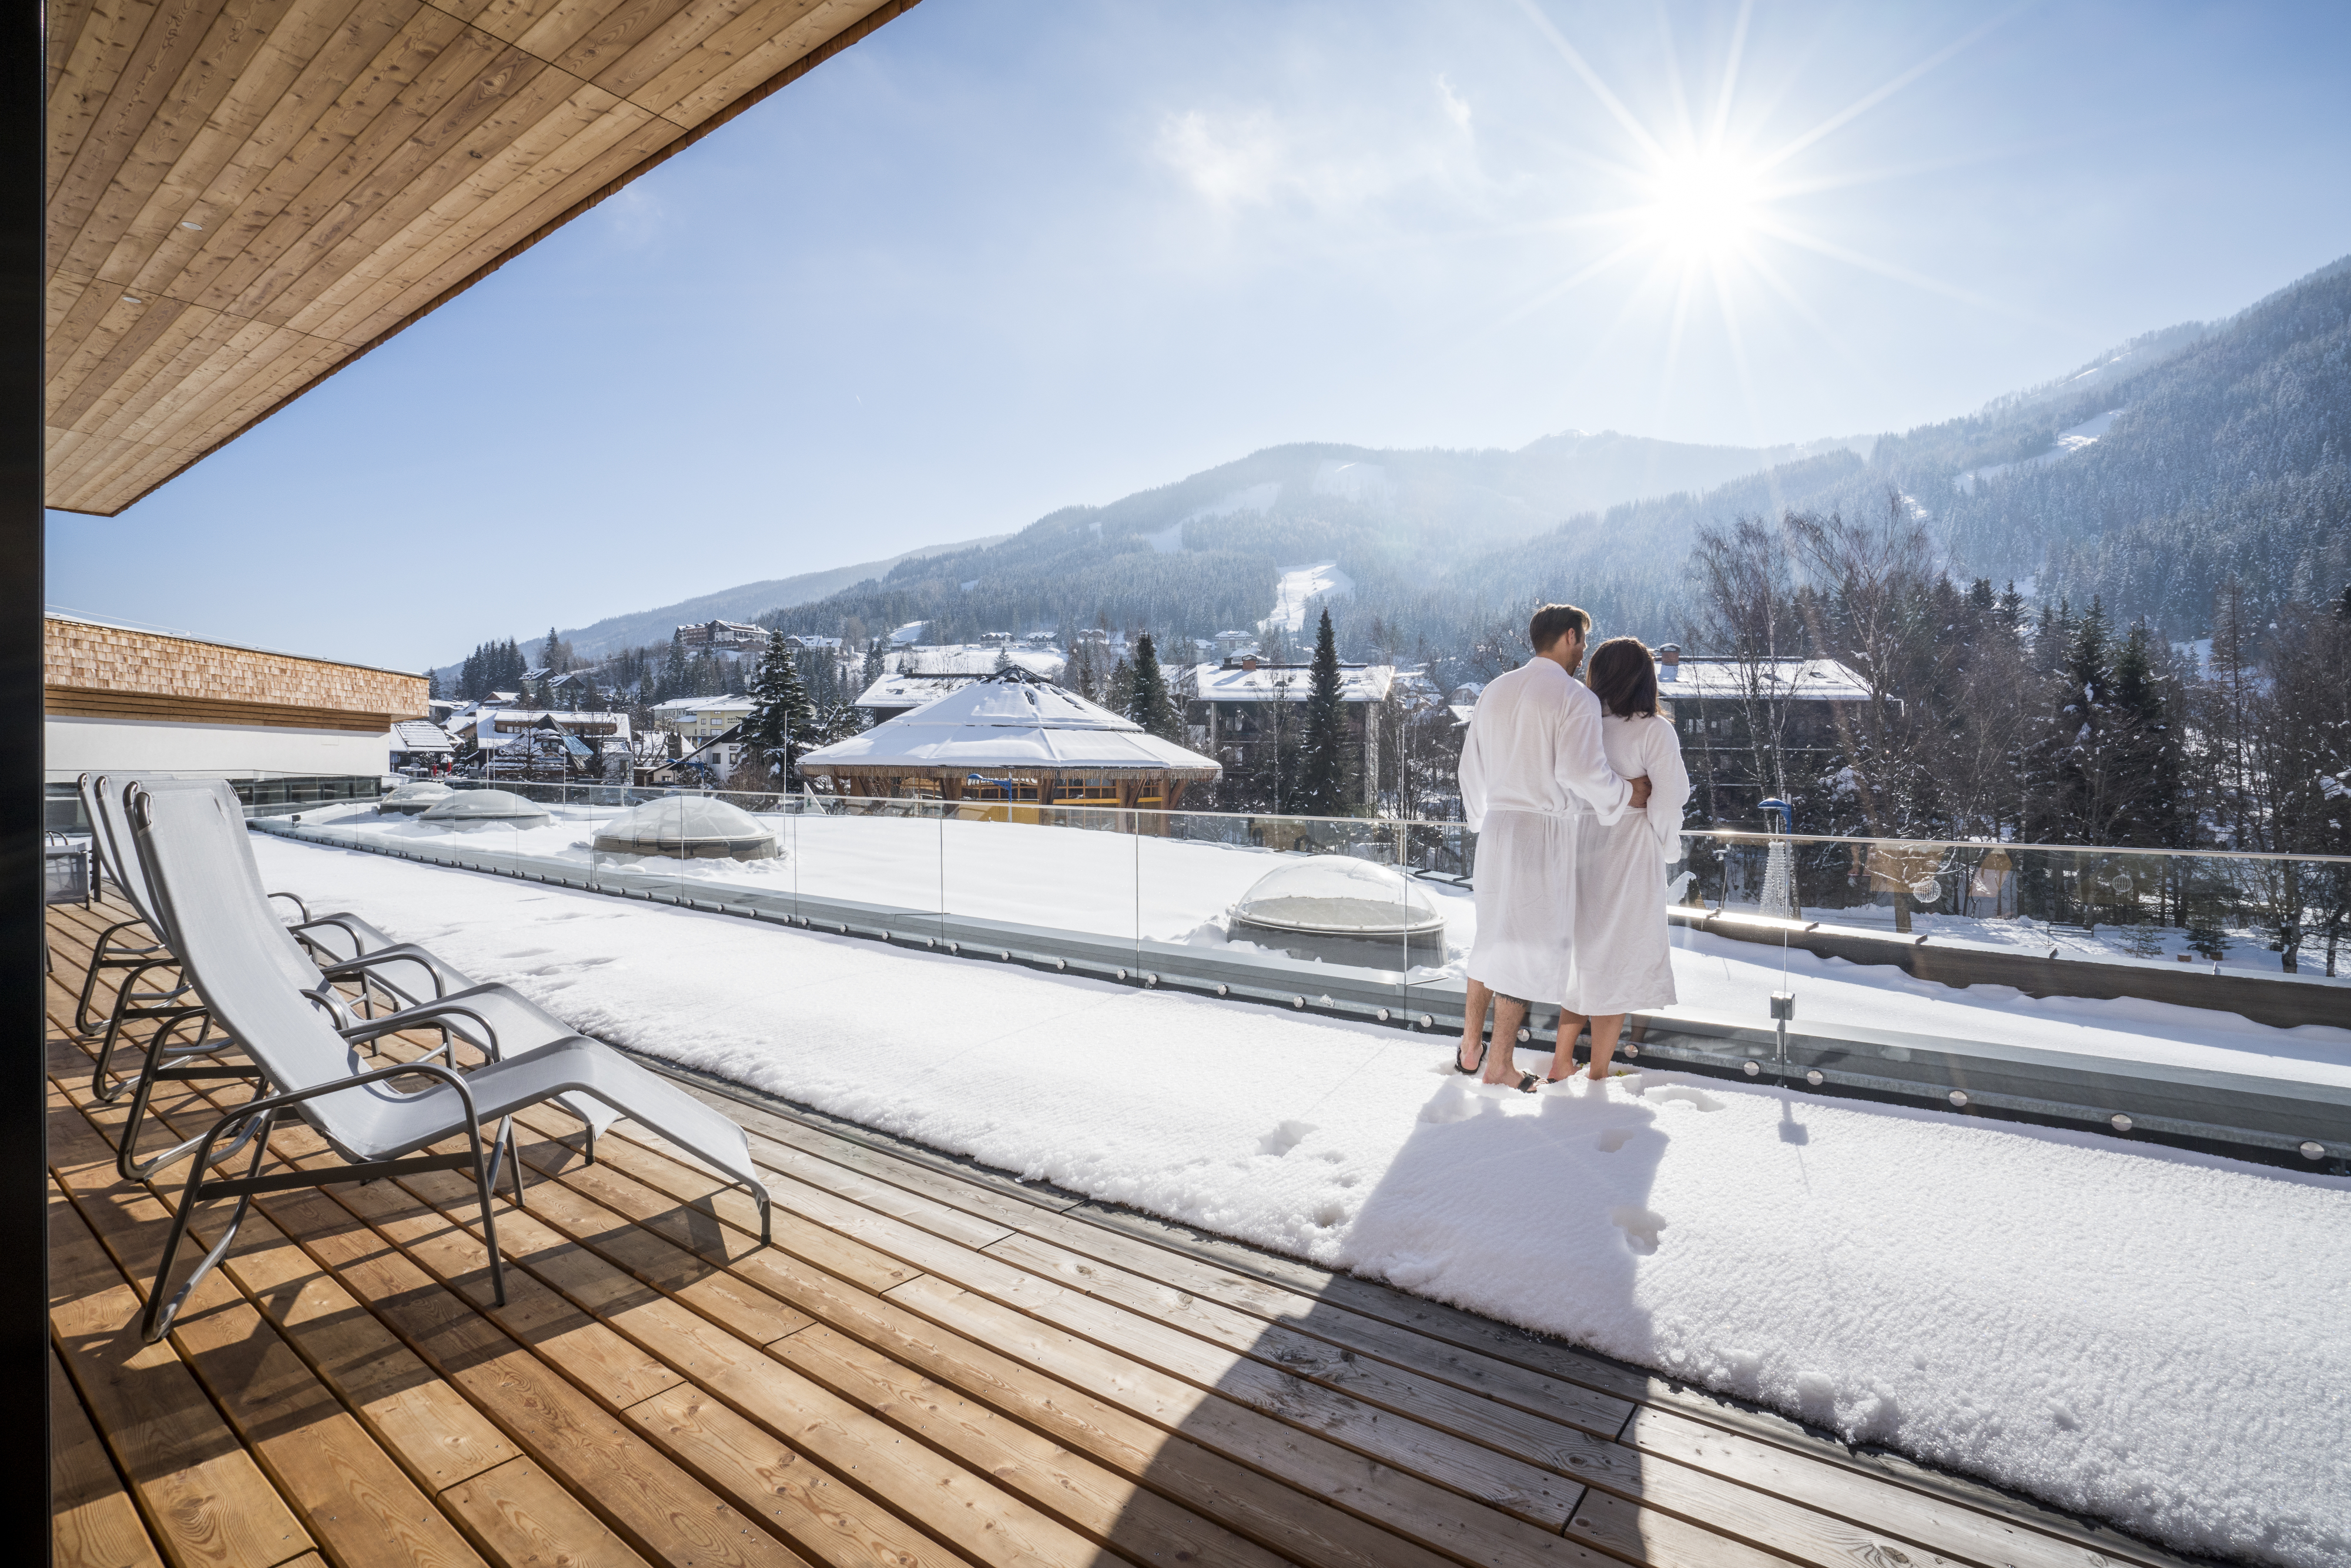 A couple is standing on a terrace enjoying the nice weather and the beautiful view in winter.